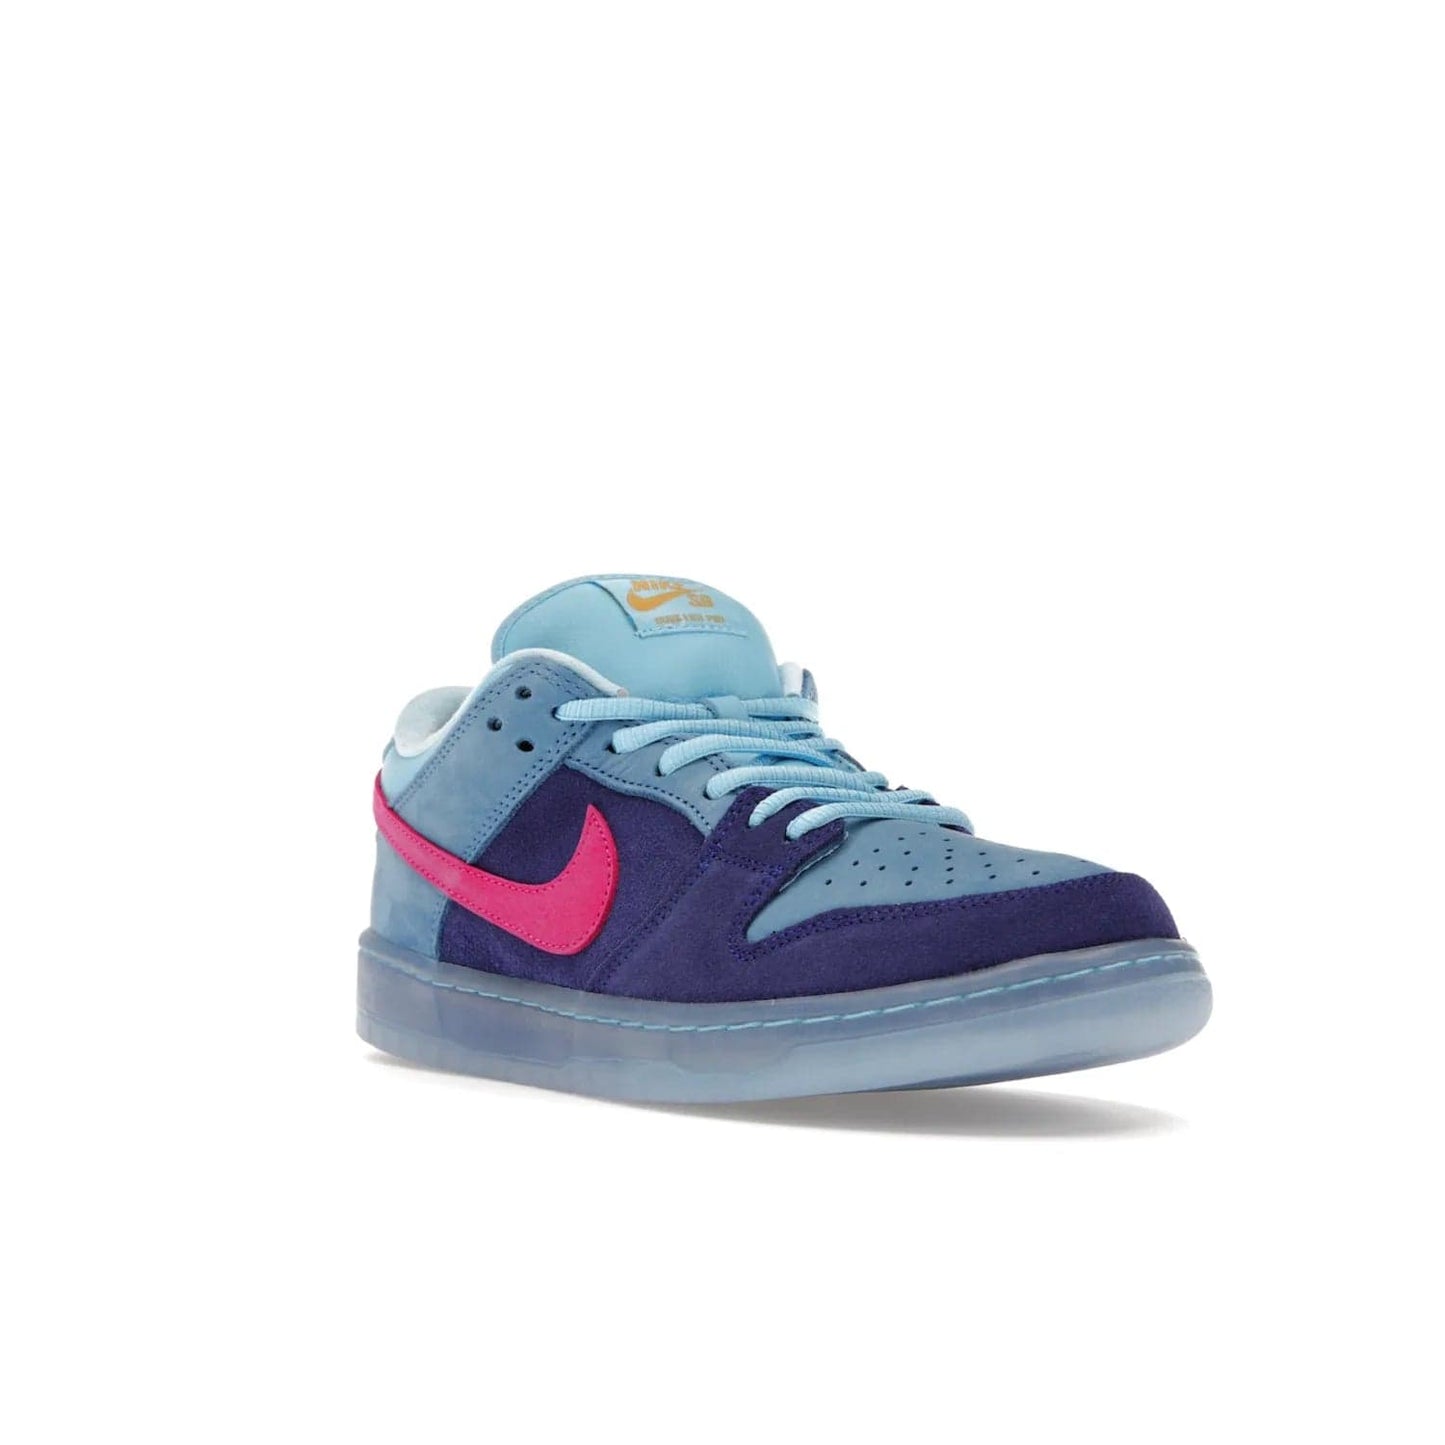 Nike SB Dunk Low Run The Jewels - Image 6 - Only at www.BallersClubKickz.com - The Nike SB Dunk Low Run The Jewels pays tribute to the Run the Jewels 3 album cover. It features a blue suede upper with pink suede accents, gold branding and 3 lace sets. RTJ insoles complete this limited edition sneaker. Get it now for your shoe collection.